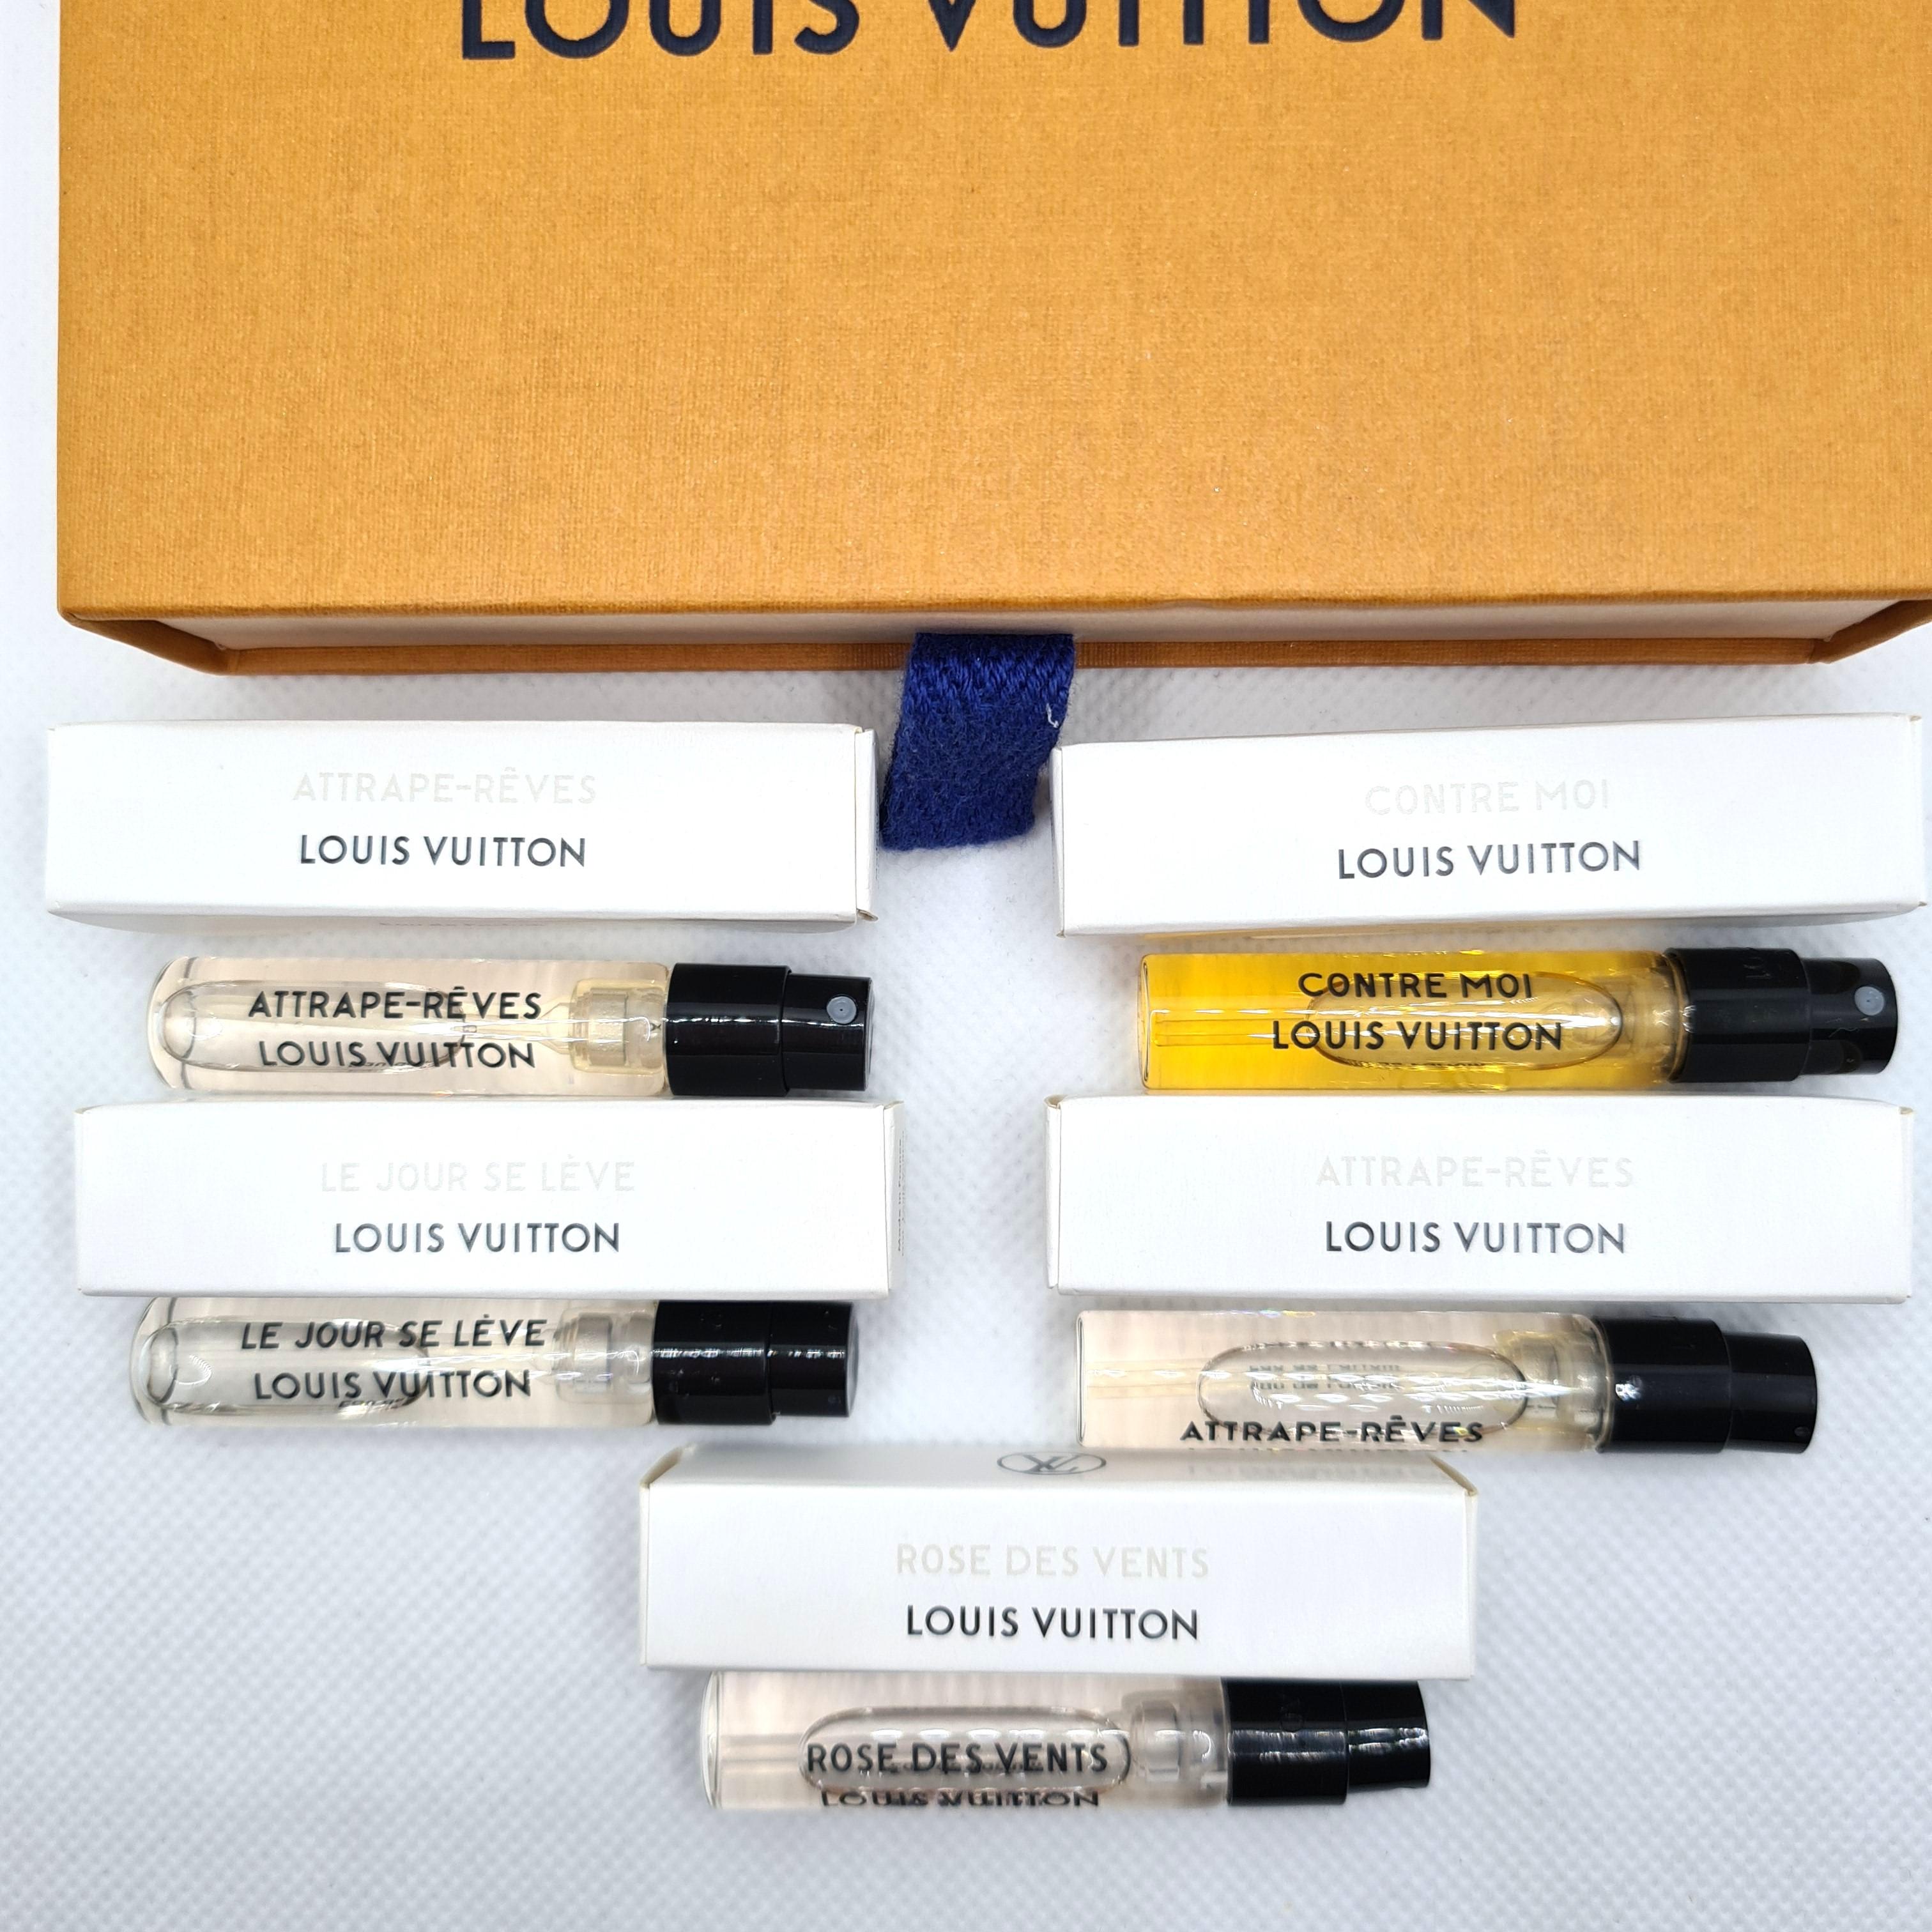 Louis Vuitton perfume samples (comes in a box), Beauty & Personal